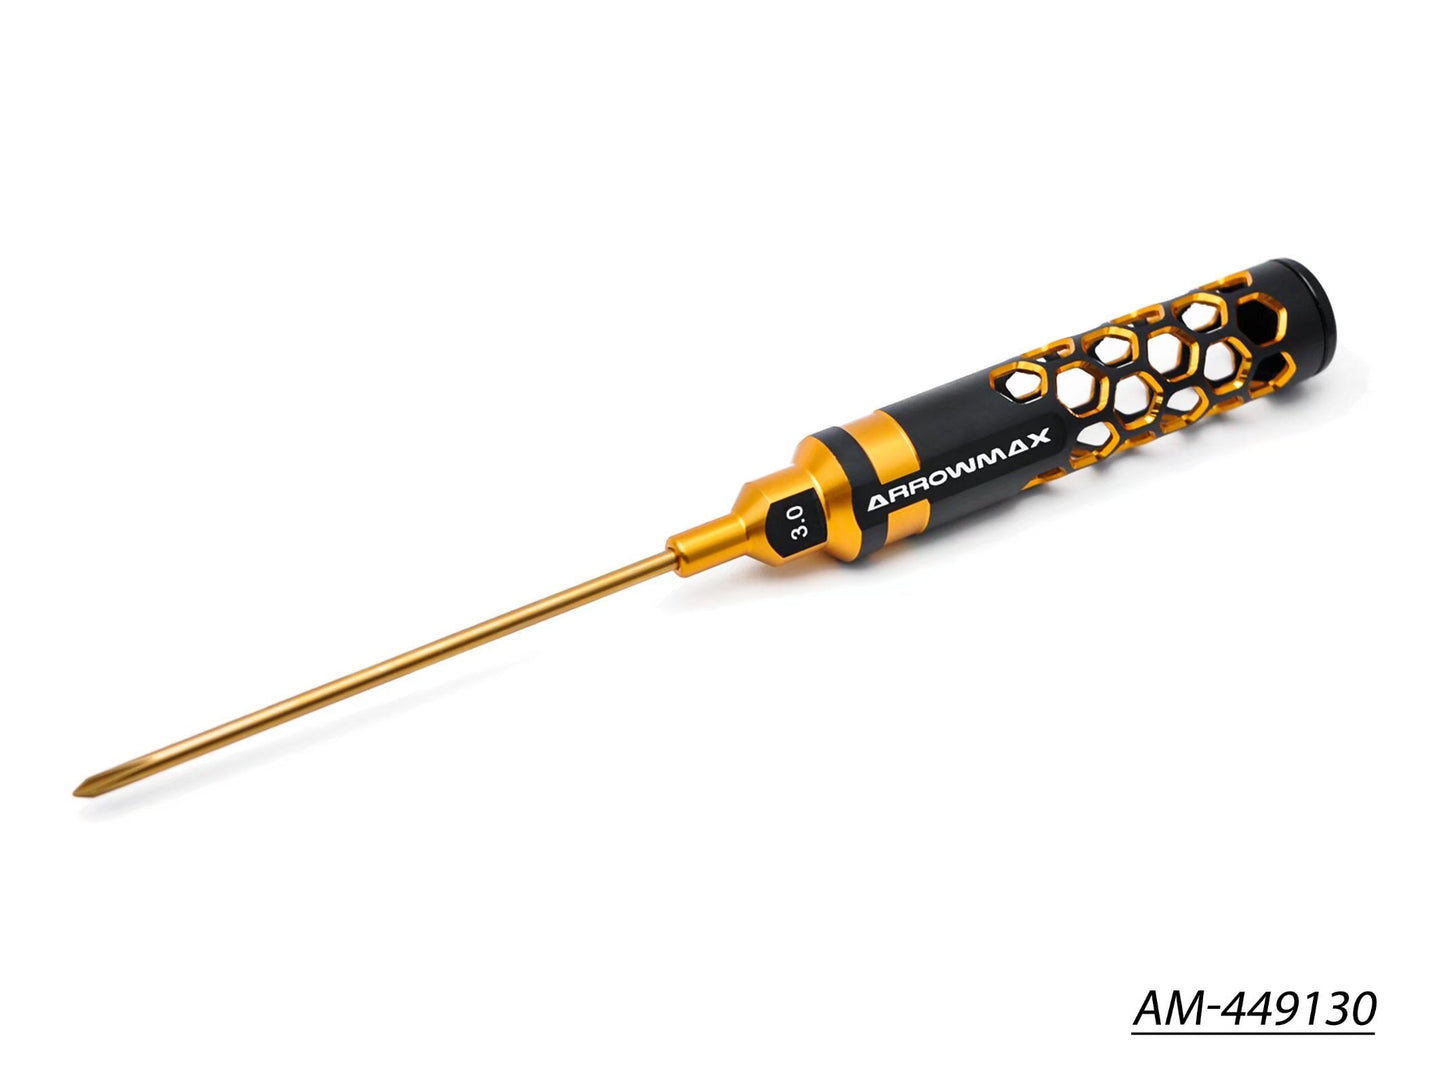 Phillips Screwdriver 3.0 X 110mm Limited Edition AM-449130